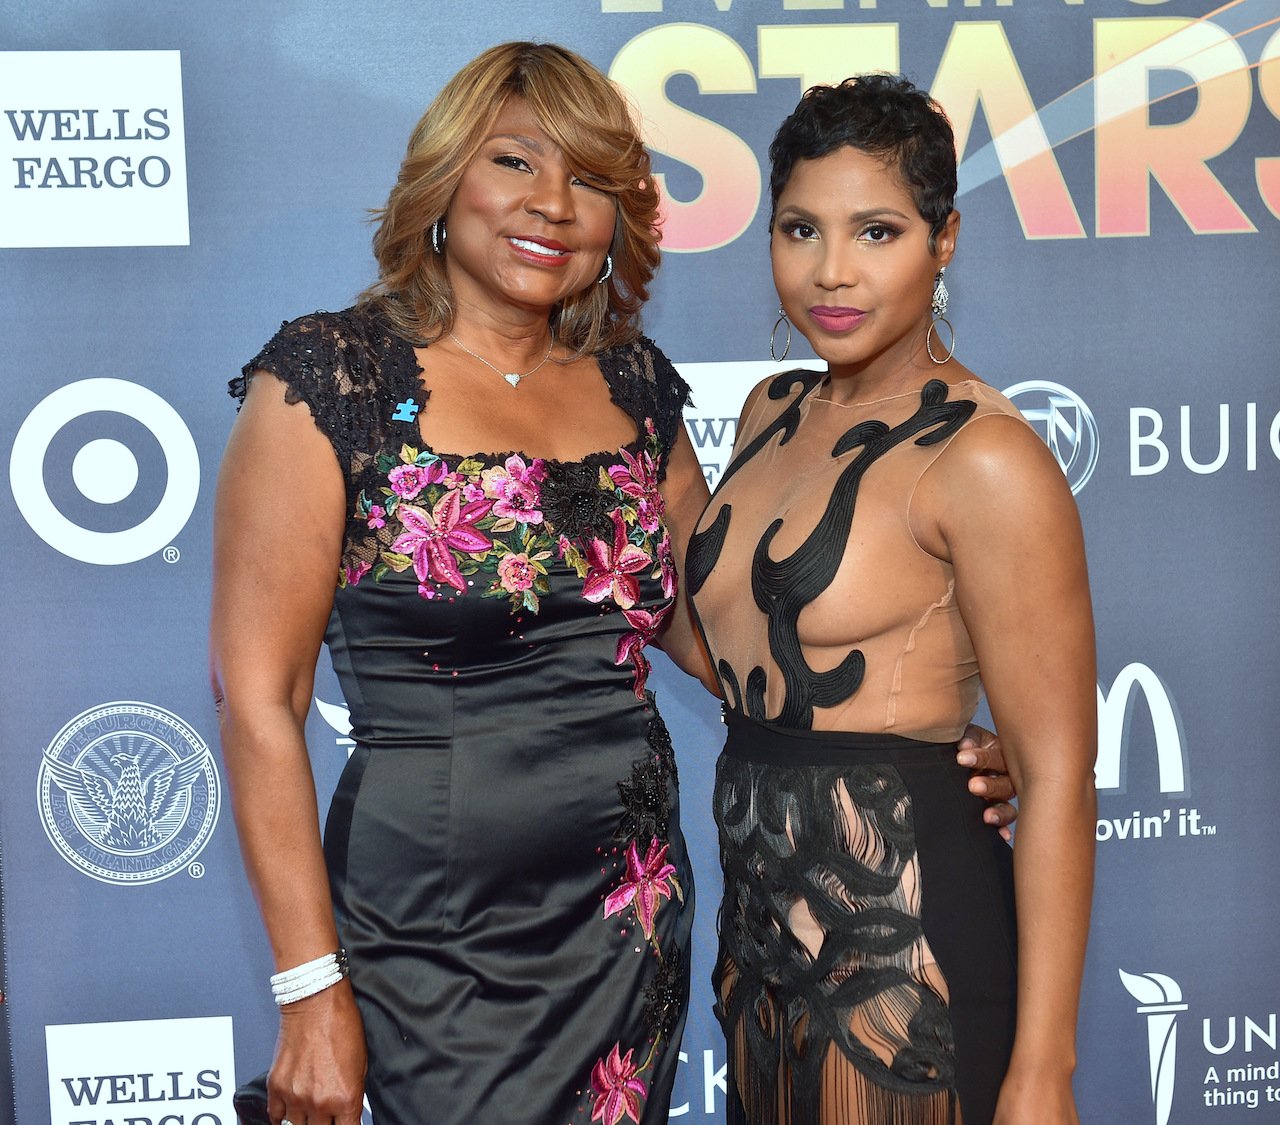 Evelyn Braxton and Toni Braxton; Toni revealed her mom Evelyn is dating